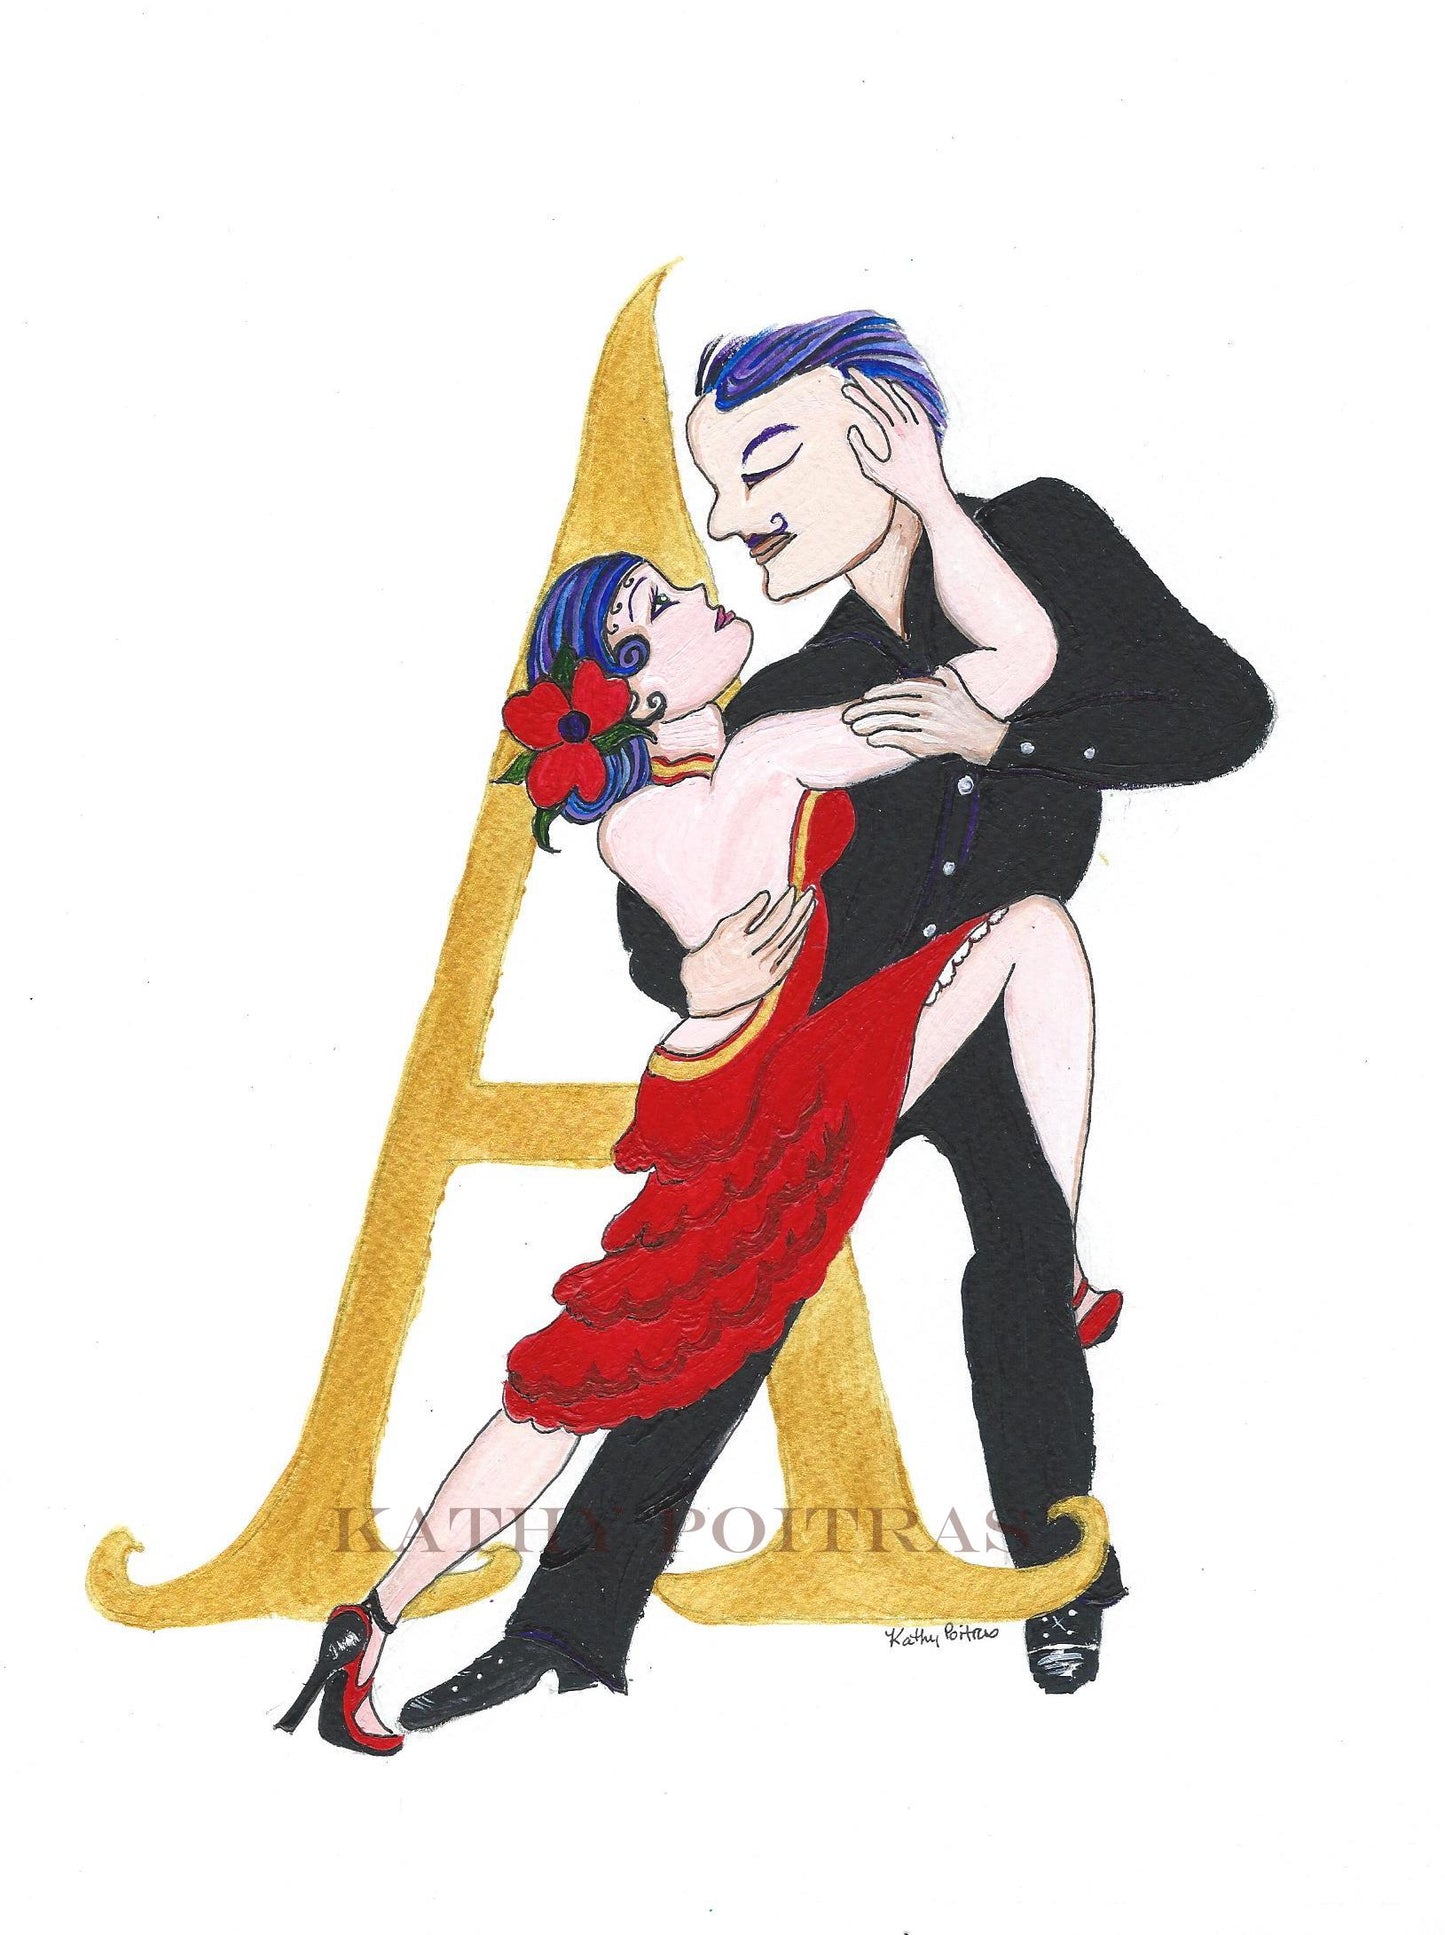 Illustrated letter A, for Argentine Tango. on 8.5 x 11 inch watercolor paper. watercolor, ink and gold metallic paint, by artist Kathy Poitras